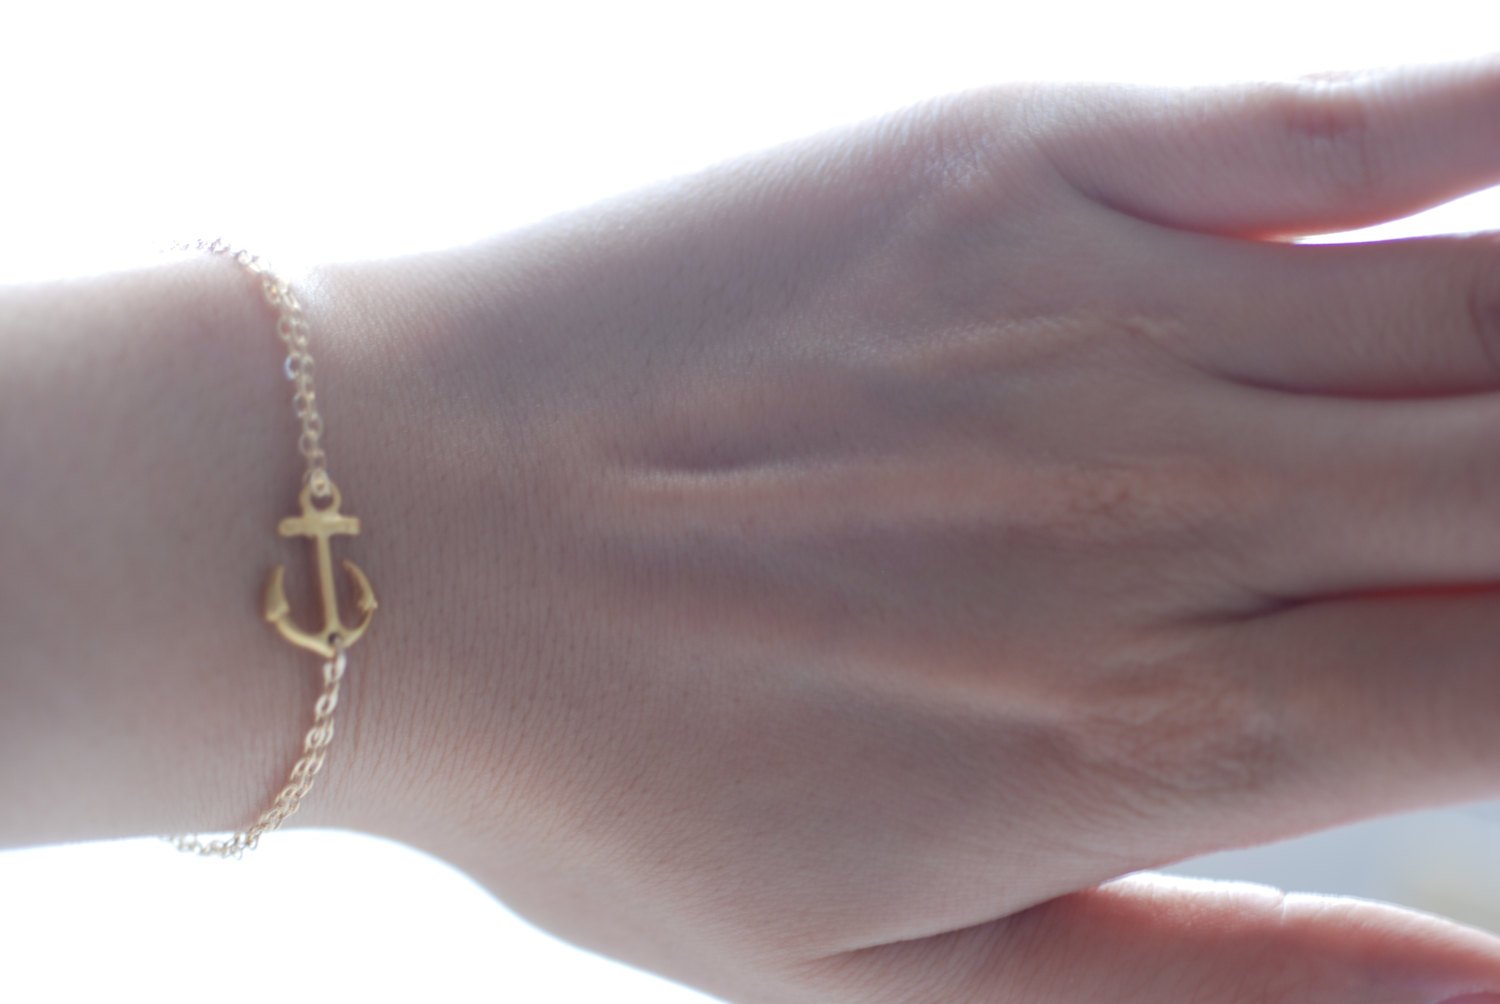 Anchor Bracelet, Delta Gamma Jewelry,DG Bracelet,Sideways Anchor Bracelet,Delta Gamma Sorority,Simple Everyday Jewelry by HeirloomEnvy - HarperCrown